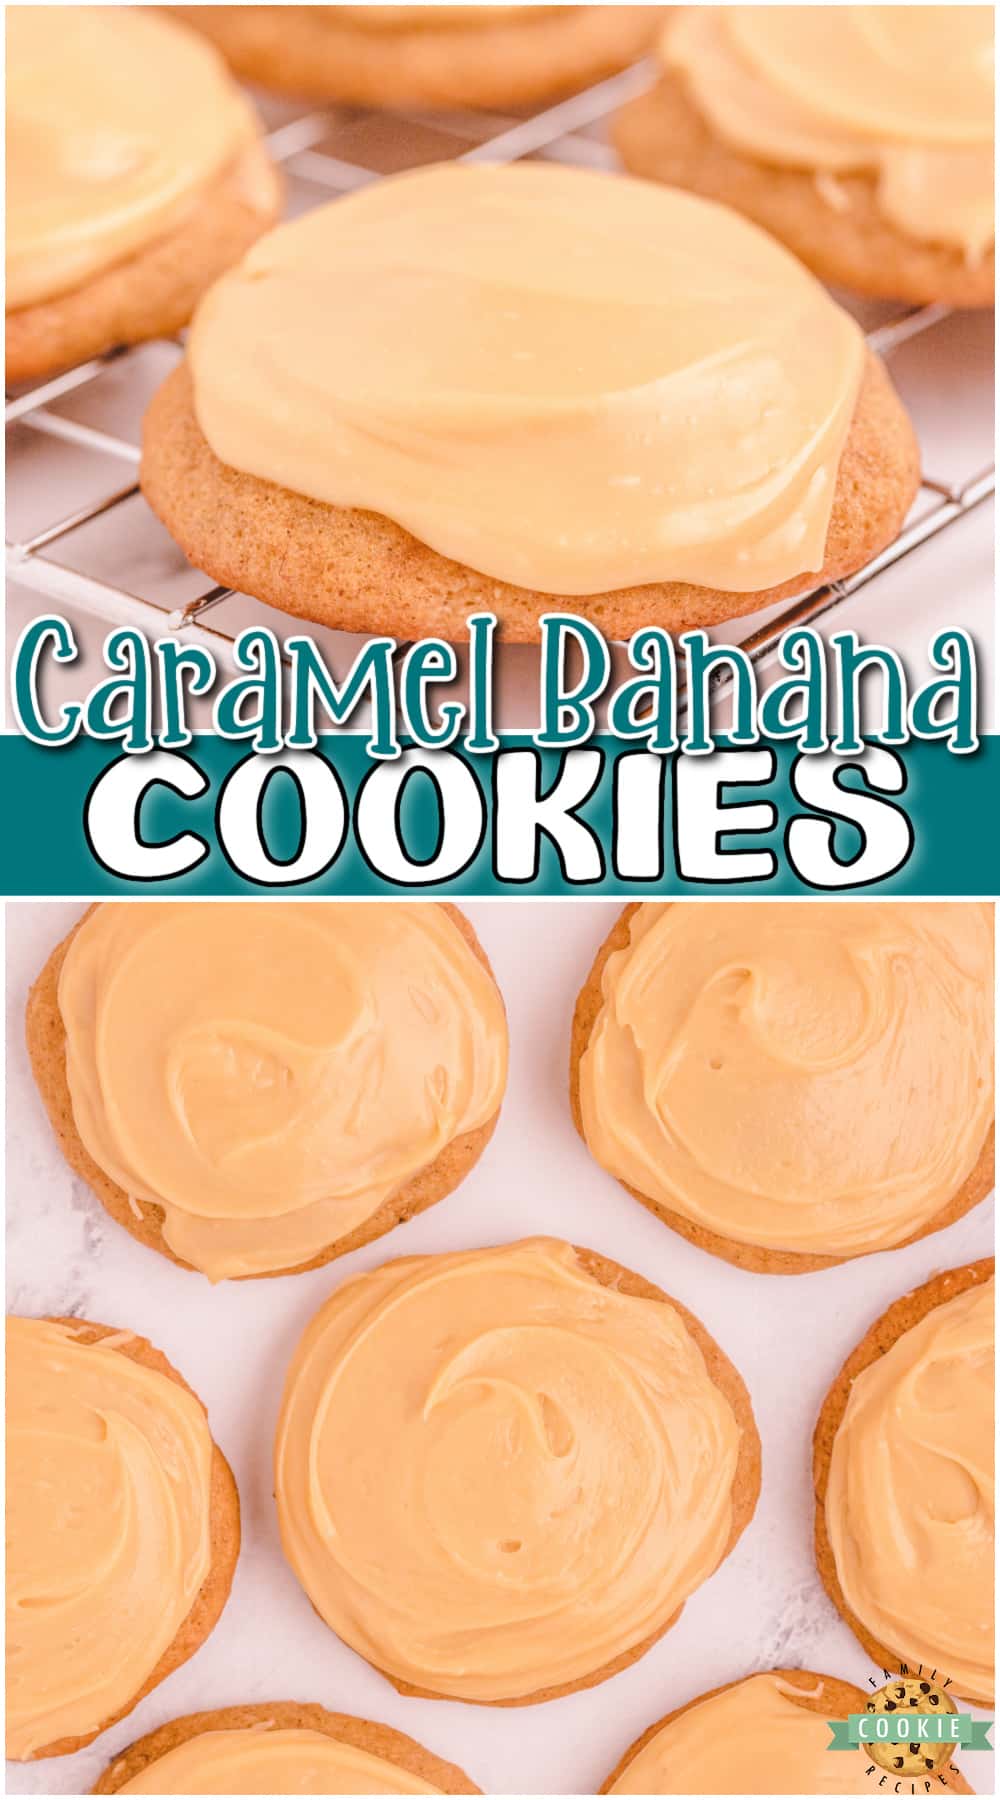 Caramel Banana cookies made with ripe bananas & cinnamon spice, then topped with a warm caramel icing! Banana + Caramel is a fantastic combination in these soft, pillowy cookies!